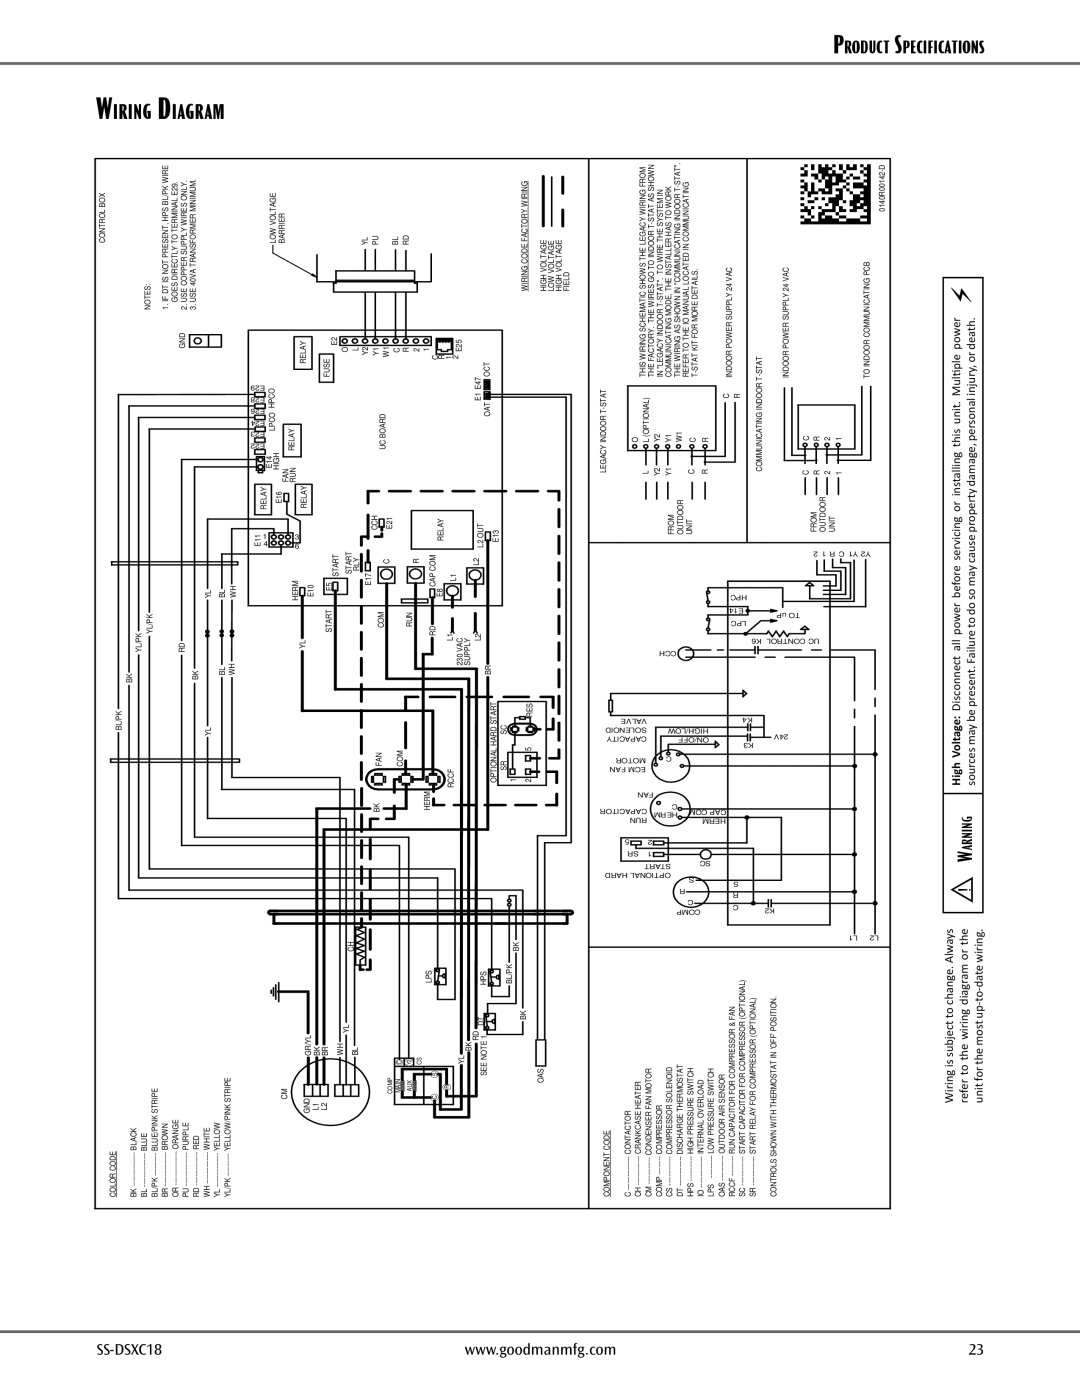 Goodmans Split System Air Conditioner warranty Wiring Diagram, SS-DSXC18, Wiring is subject to change. Always 